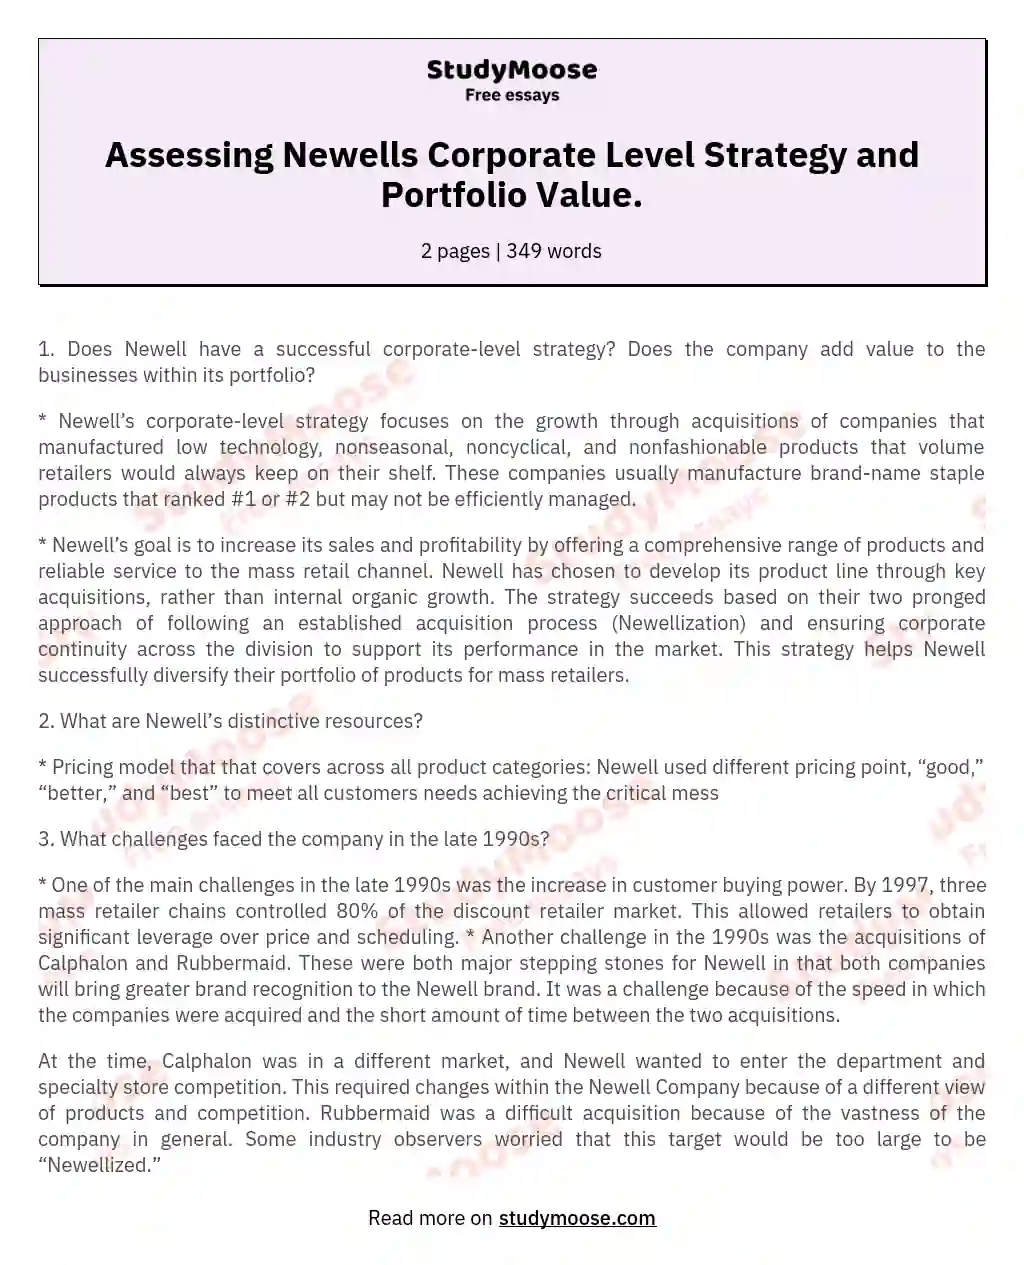 Assessing Newells Corporate Level Strategy and Portfolio Value. essay